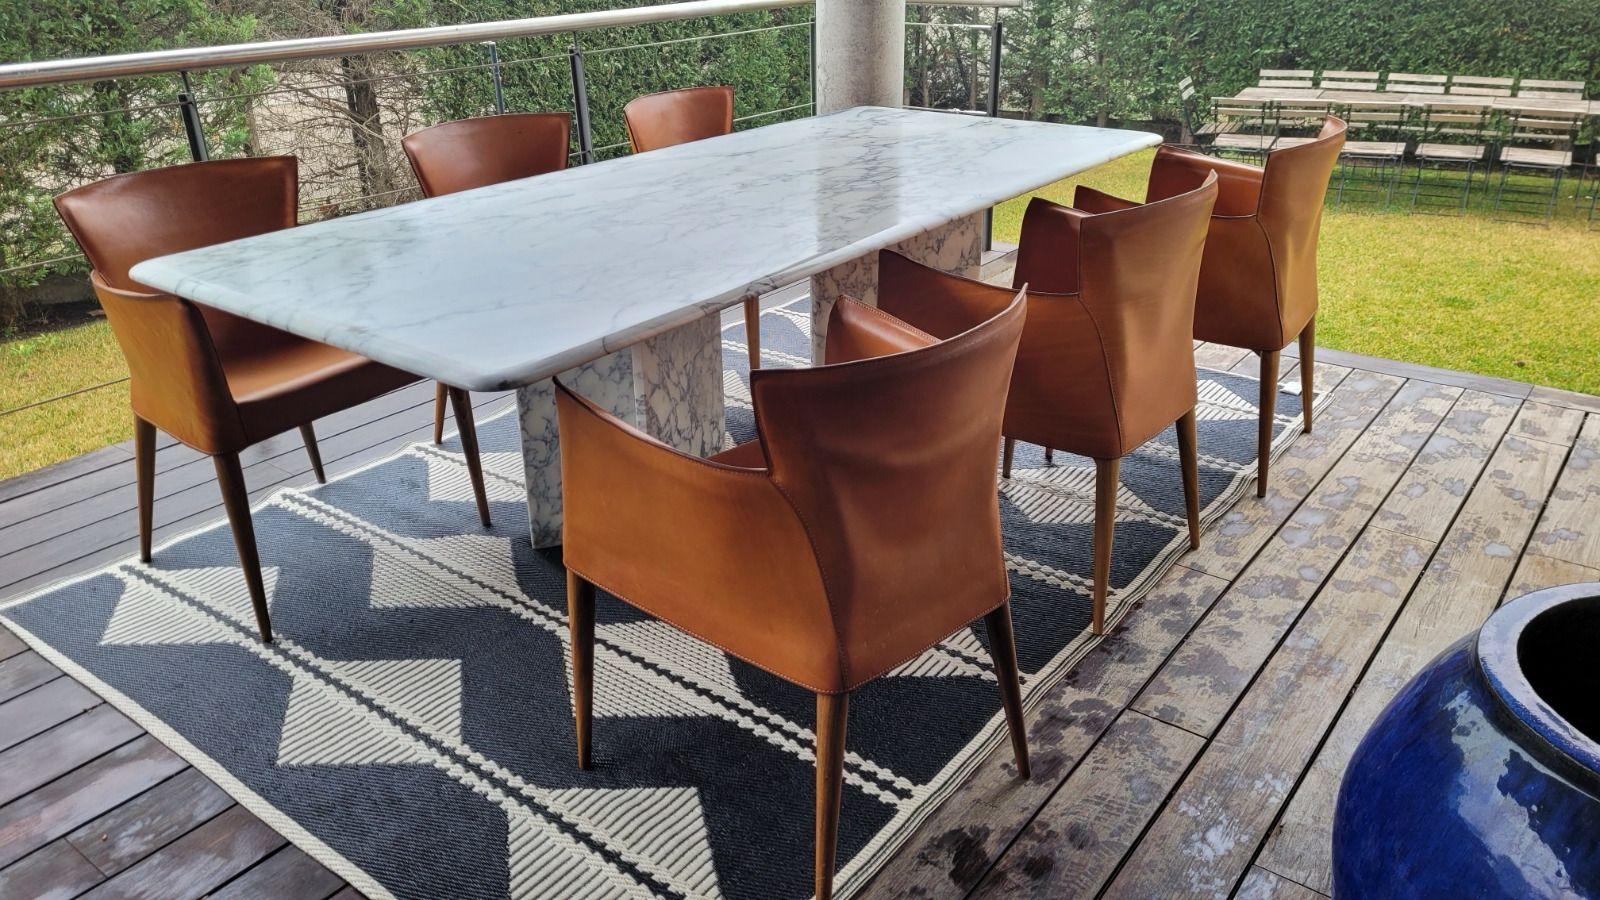 One of a King and amazing dining table or work table in beautiful Italian Carrara marble, Italian design from the 70s following the lines and style of the great designers of the time such as Willy Rizzo, Vitorio Dasi, Ico Parisi etc
Majestic table